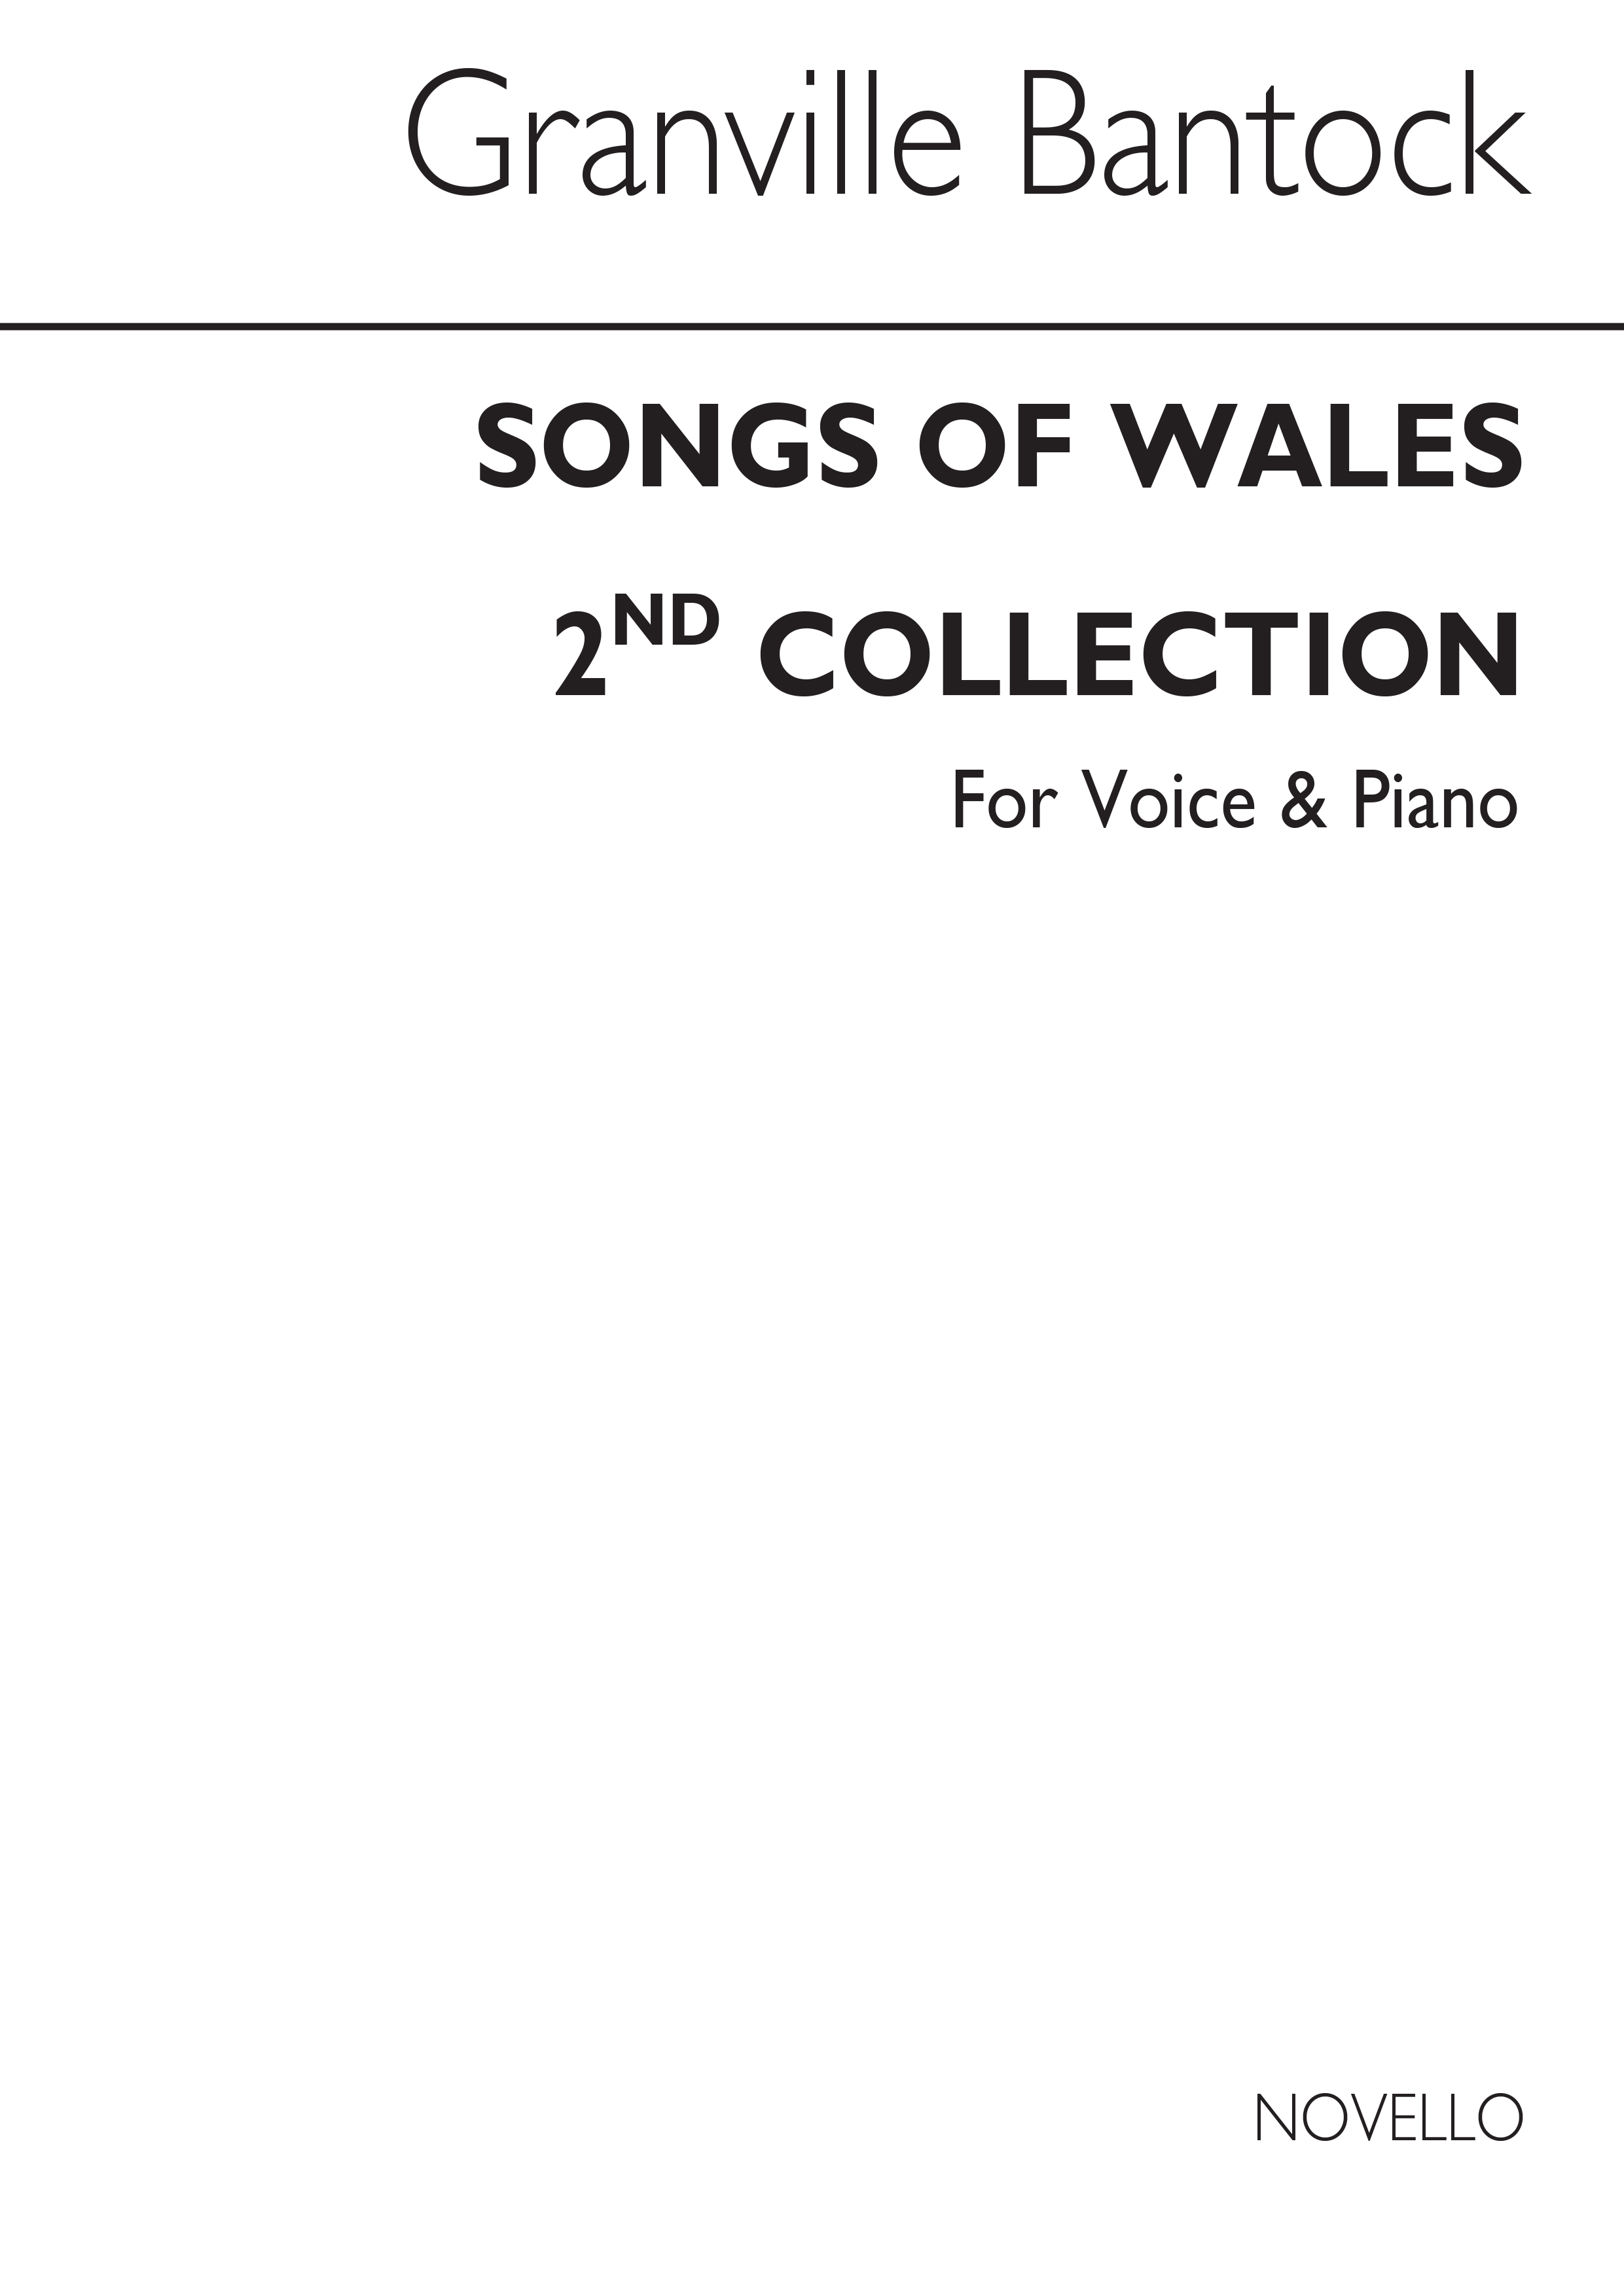 Bantock: Songs Of Wales Book 2 for Voice and Piano